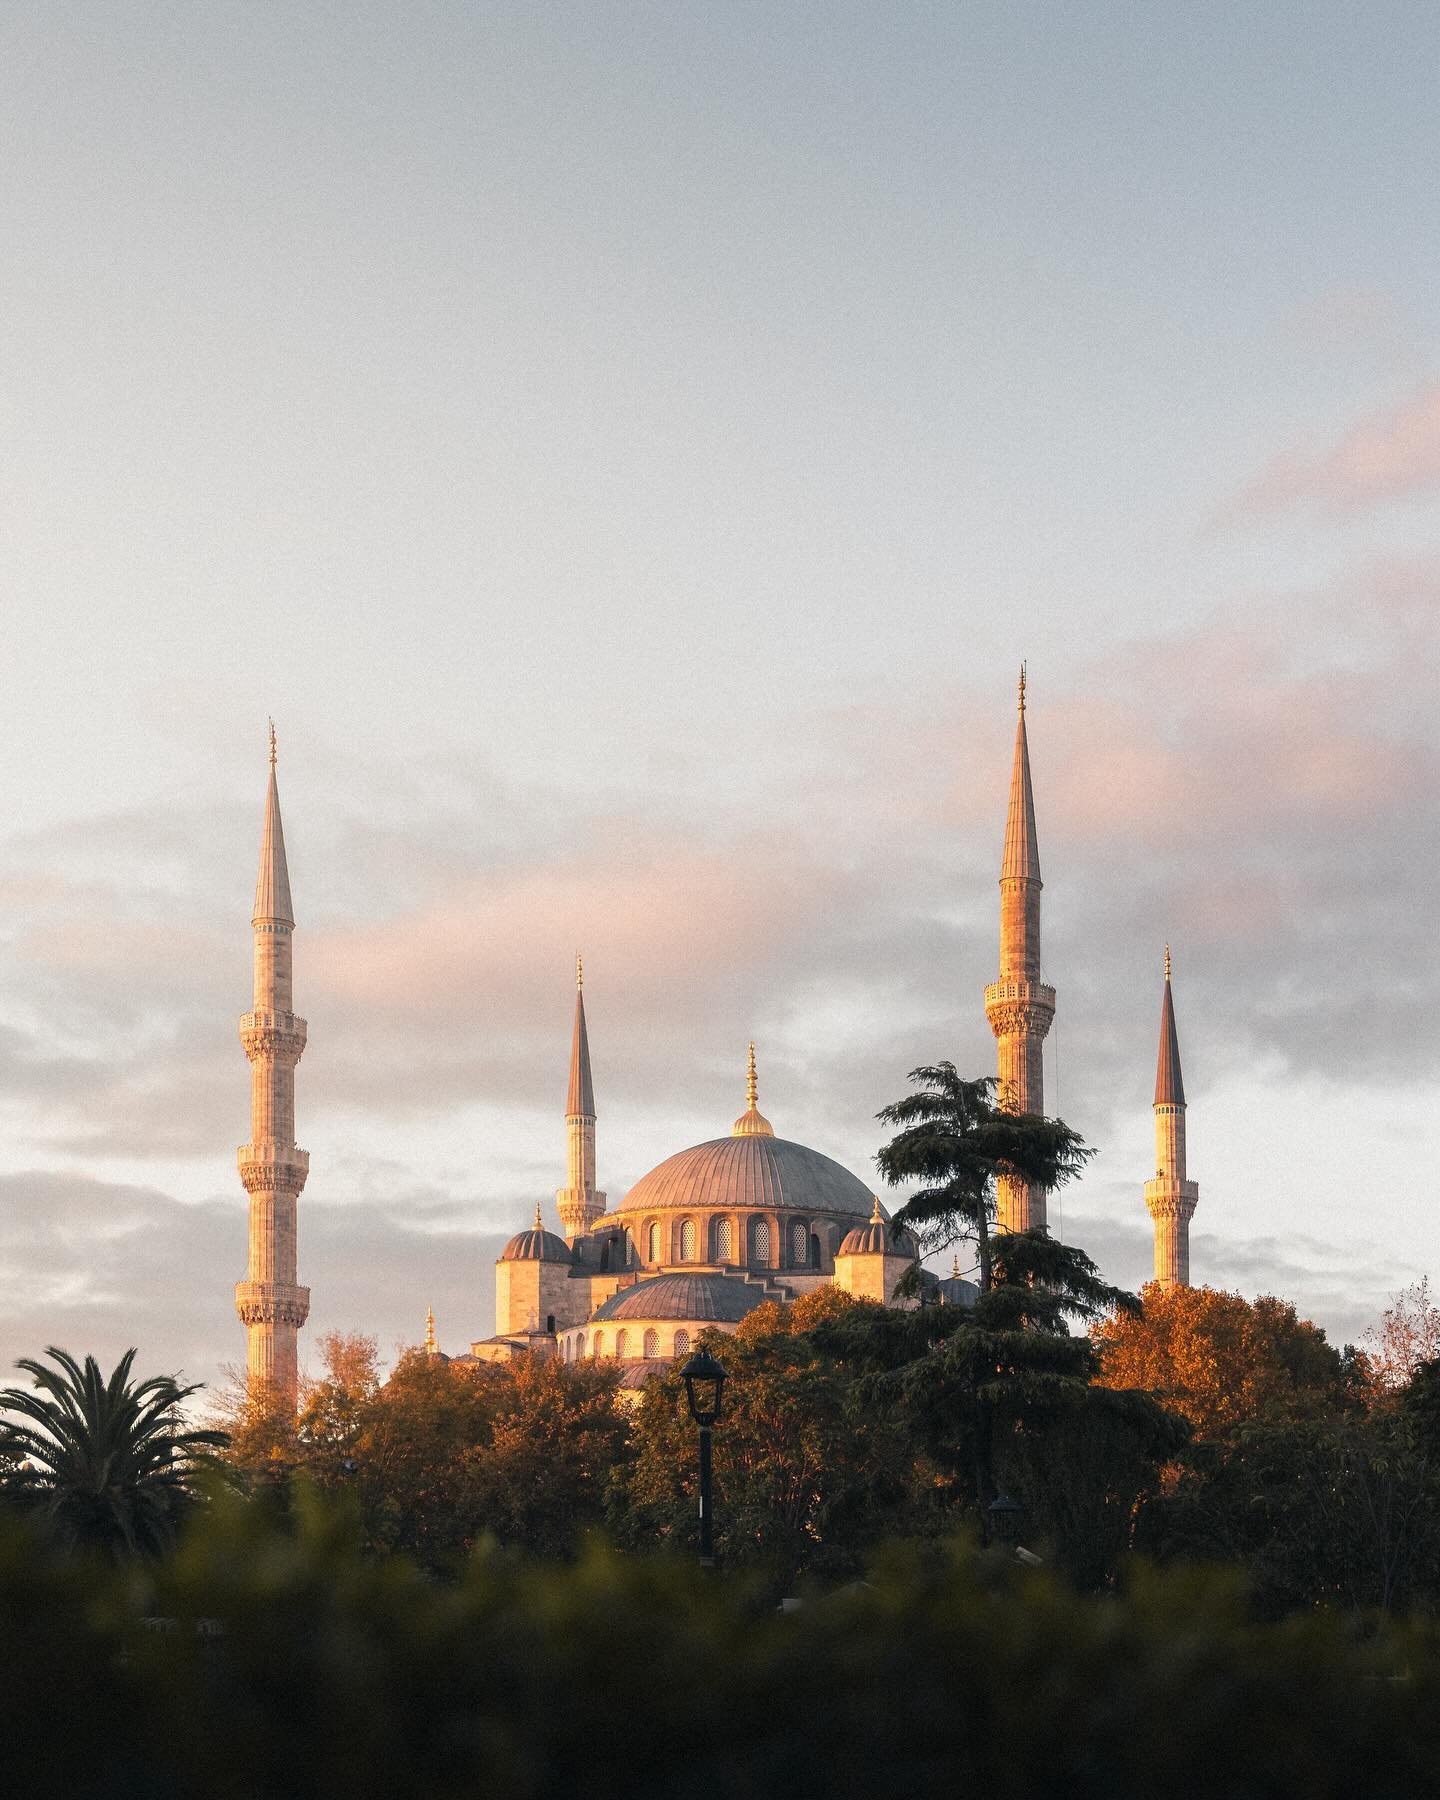 Early morning in Istanbul 🇹🇷 

I kept going back and forth on which photo I like more, and therefore which one I&rsquo;d put first. Which is your favourite?

#istanbul #t&uuml;rkiyem #turkiye #bluemosque #travelphotography #onlyint&uuml;rkiye #got&